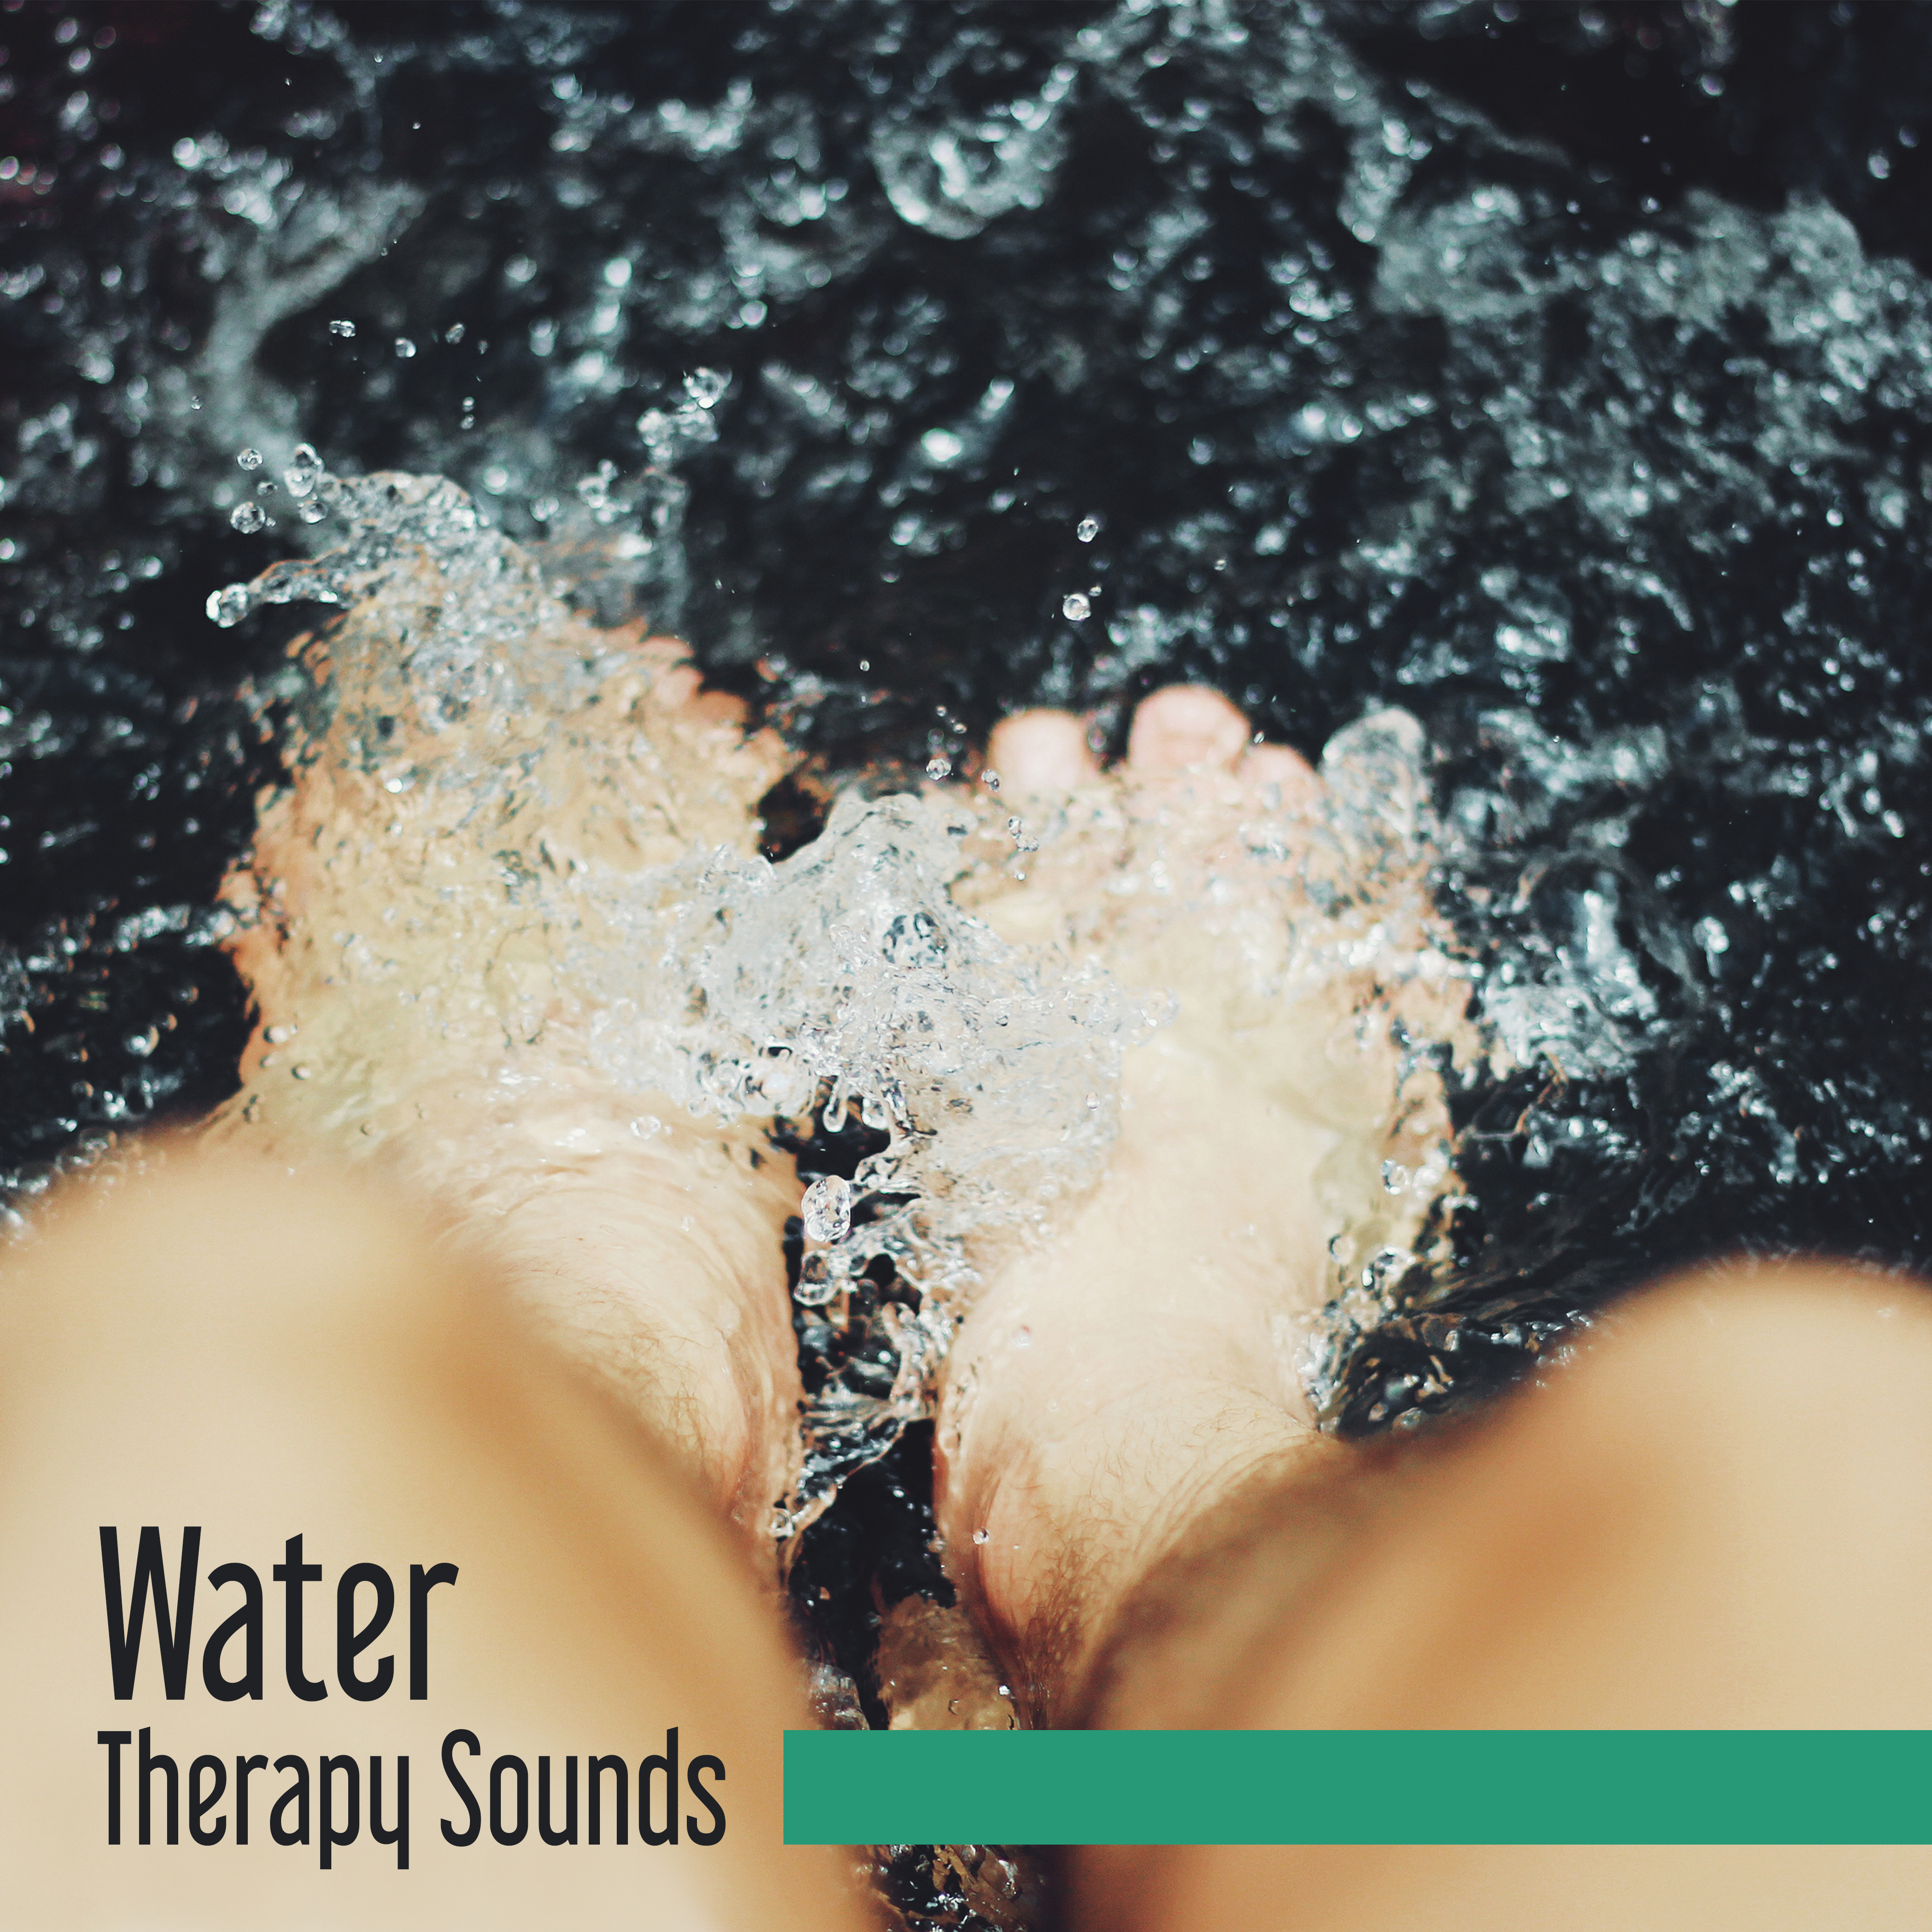 Water Therapy Sounds  Sounds to Calm Down, Nature Healing, Inner Journey, Silent Music